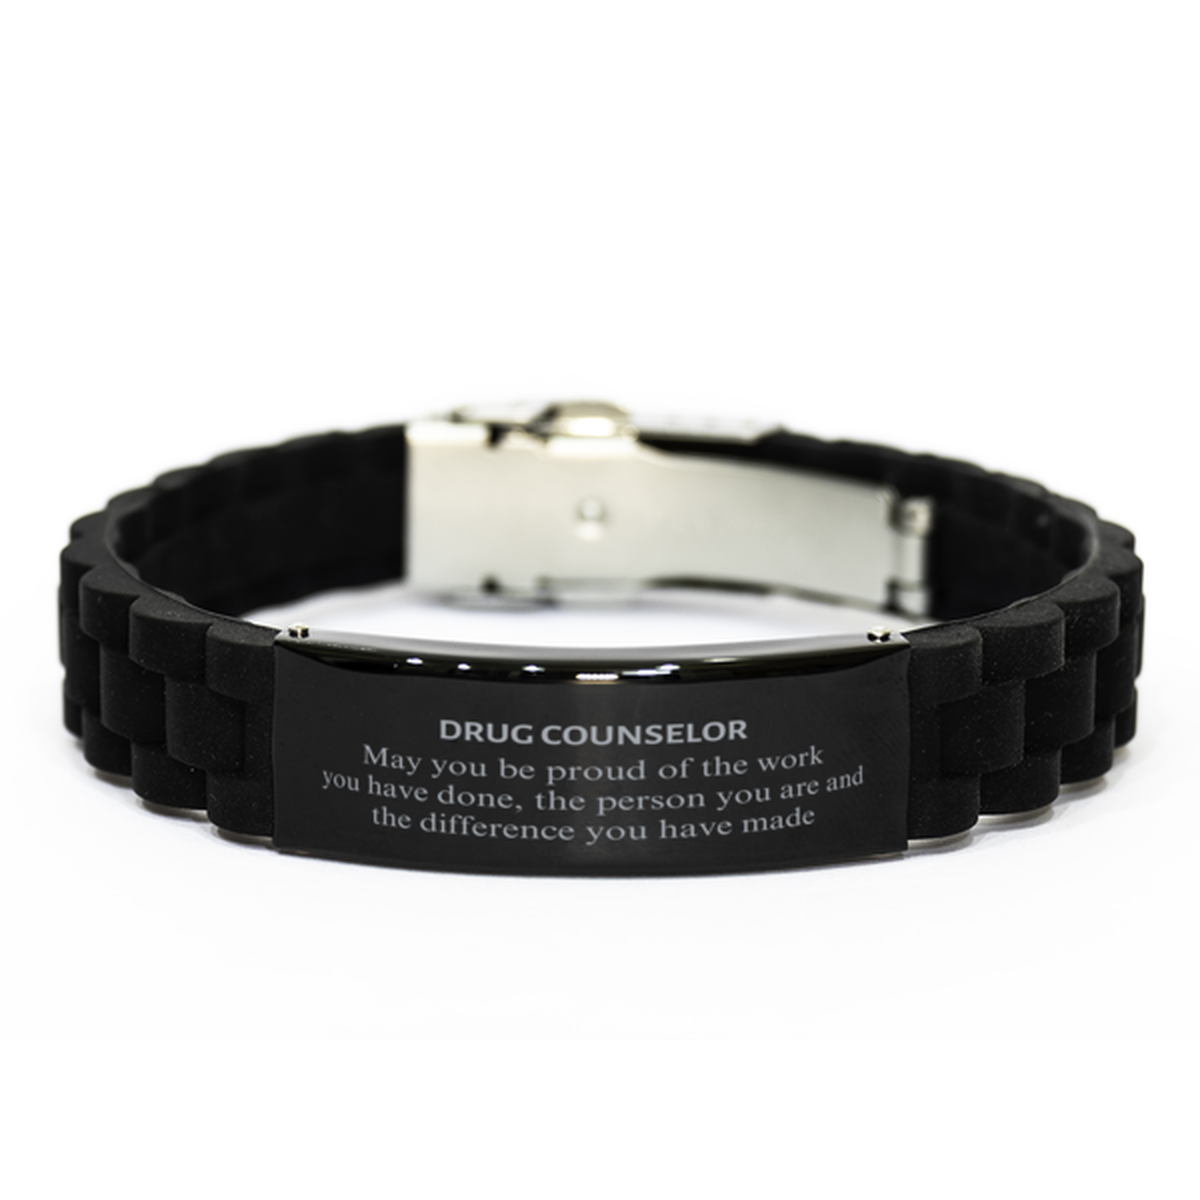 Drug Counselor May you be proud of the work you have done, Retirement Drug Counselor Black Glidelock Clasp Bracelet for Colleague Appreciation Gifts Amazing for Drug Counselor